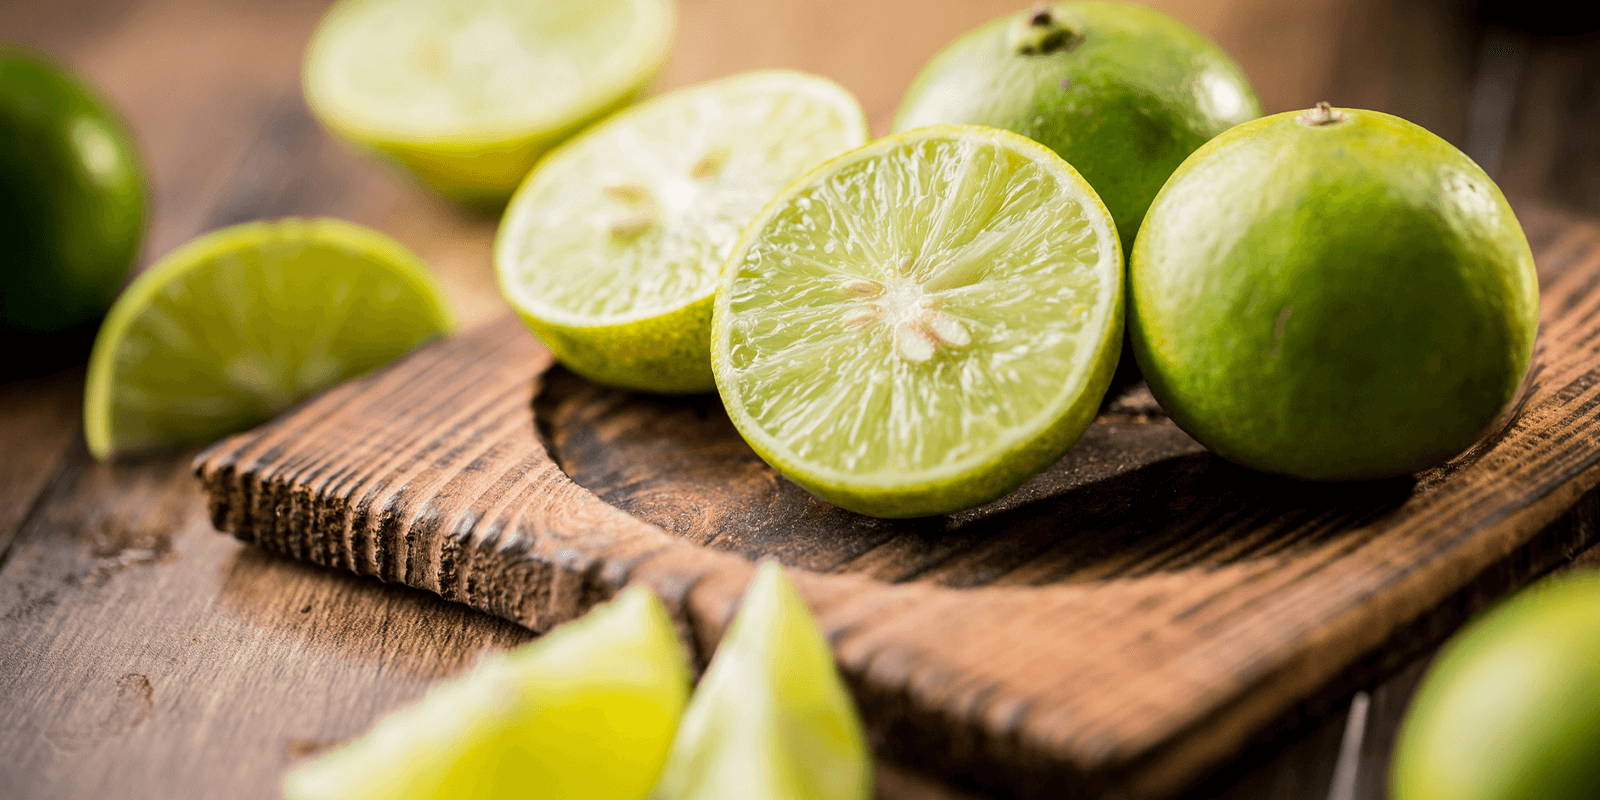 Whole, halved, and quartered limes scattered across a small wooden cutting board and wooden surface.